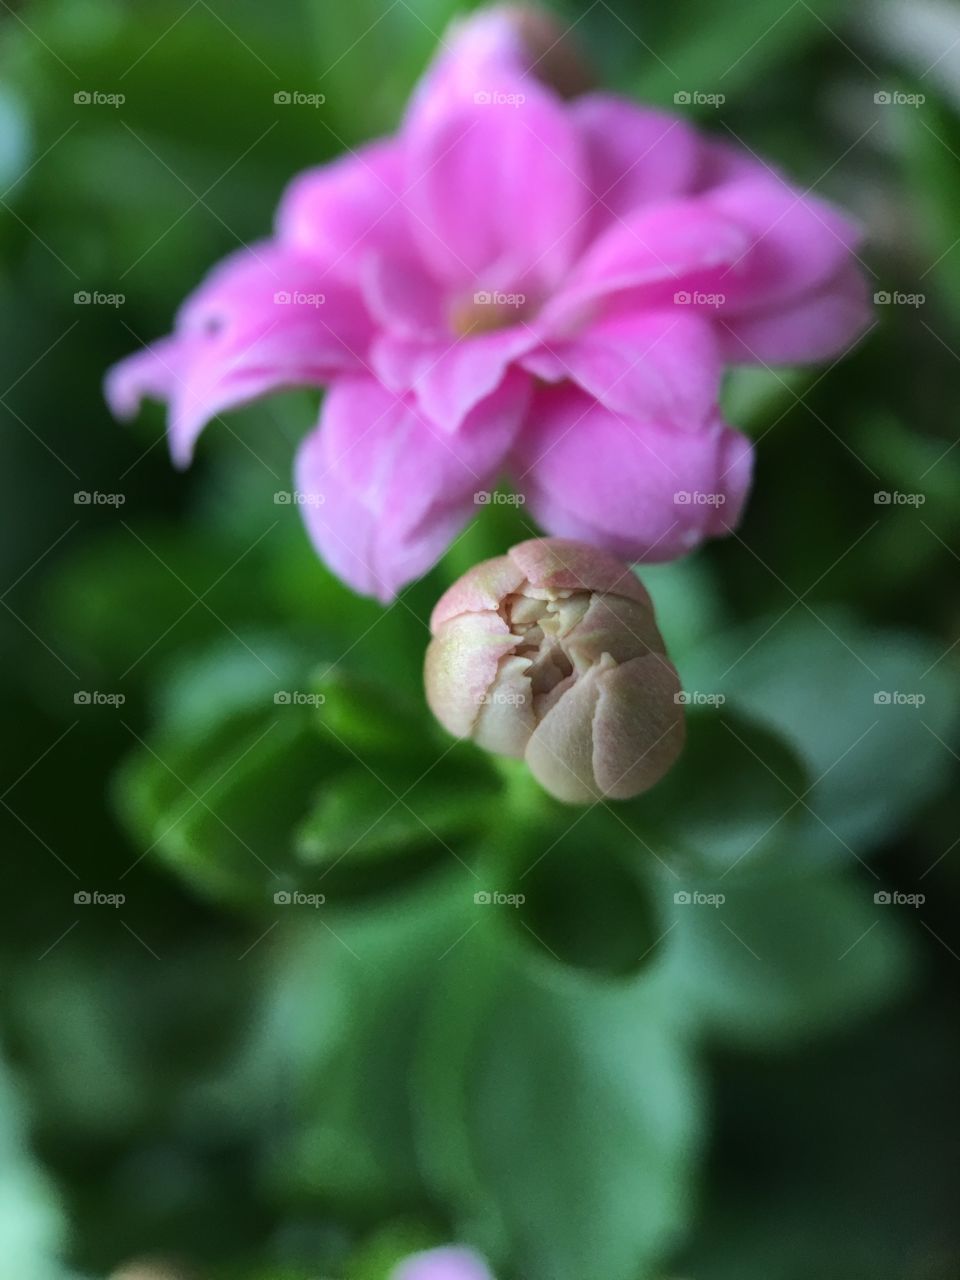 Flower and bud